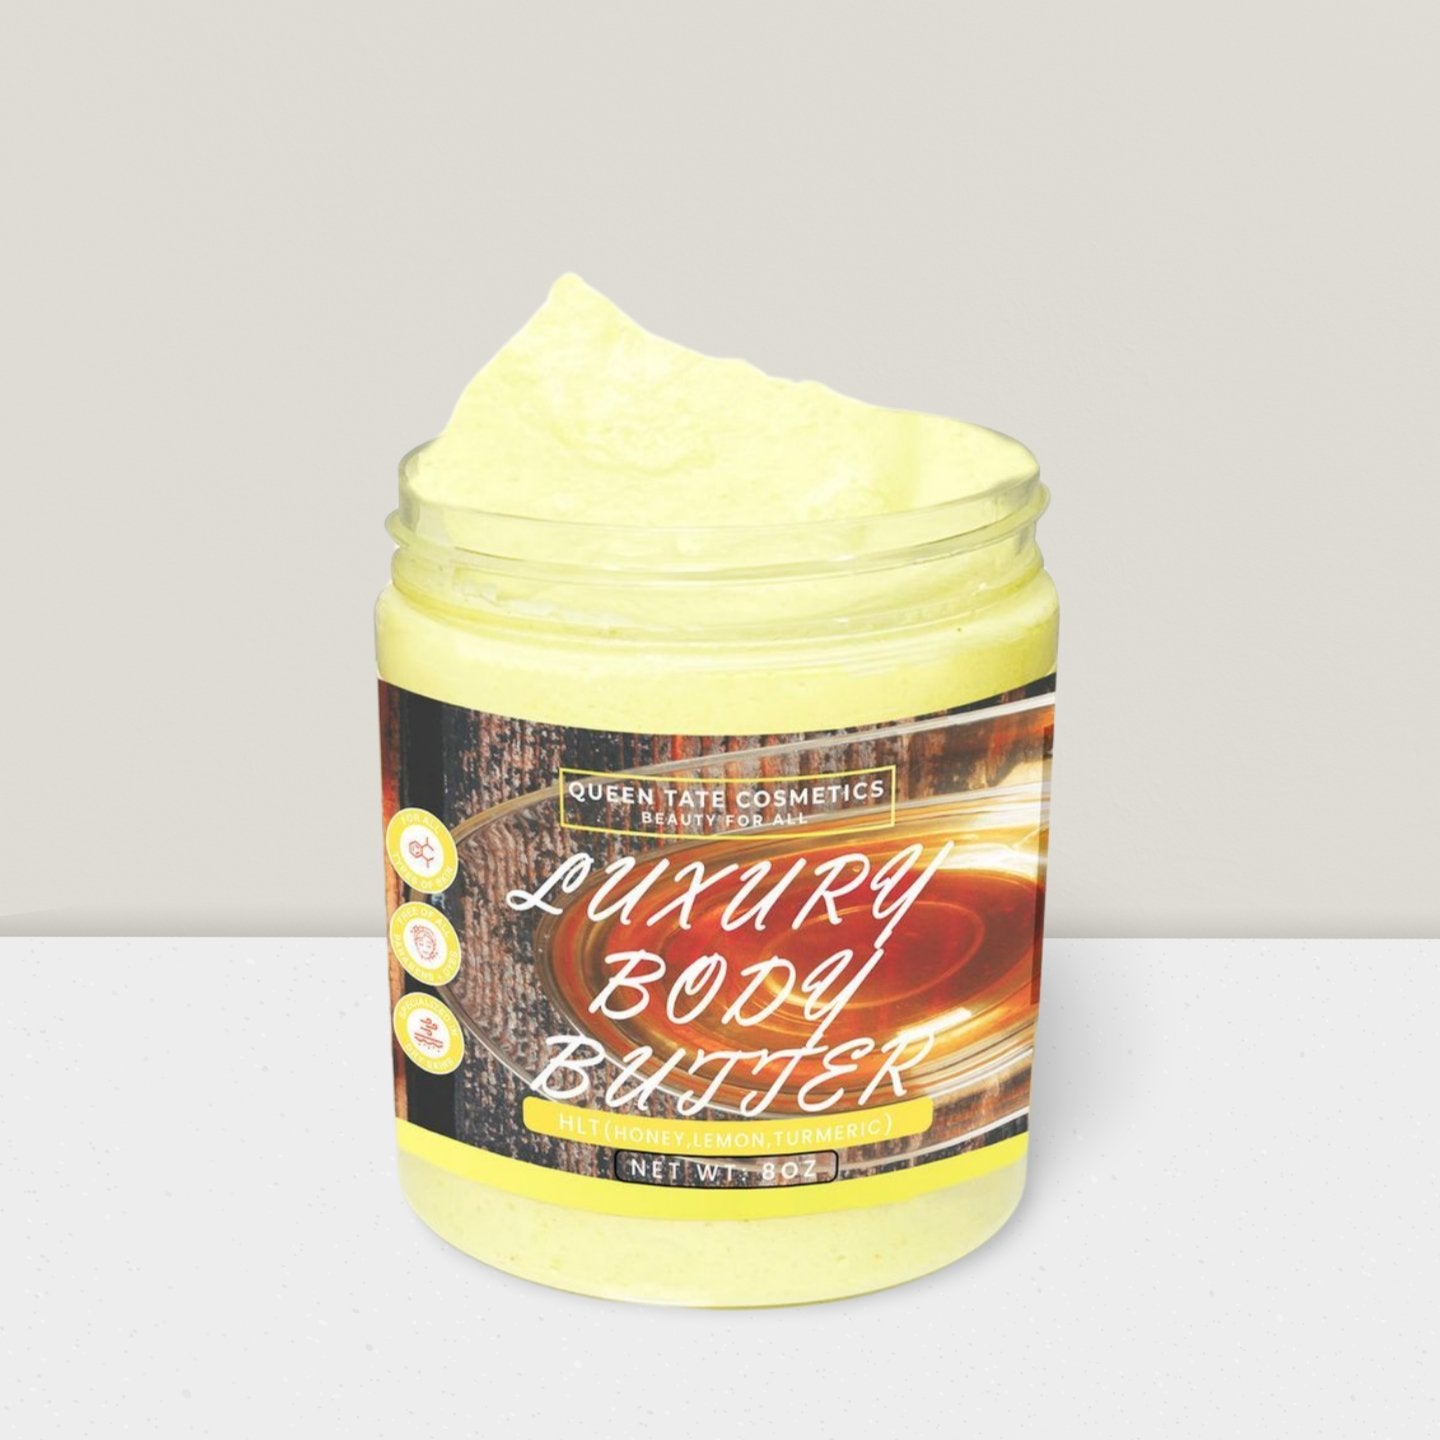 H,L,T (Honey, lemon & Turmeric)-Handcrafted Body Butter - Queen Tate CosmeticsHandcrafted Luxury Body ButterH,L,T (Honey, lemon & Turmeric)-Handcrafted Body ButterHandcrafted Luxury Body ButterQueen Tate Cosmetics 8oz